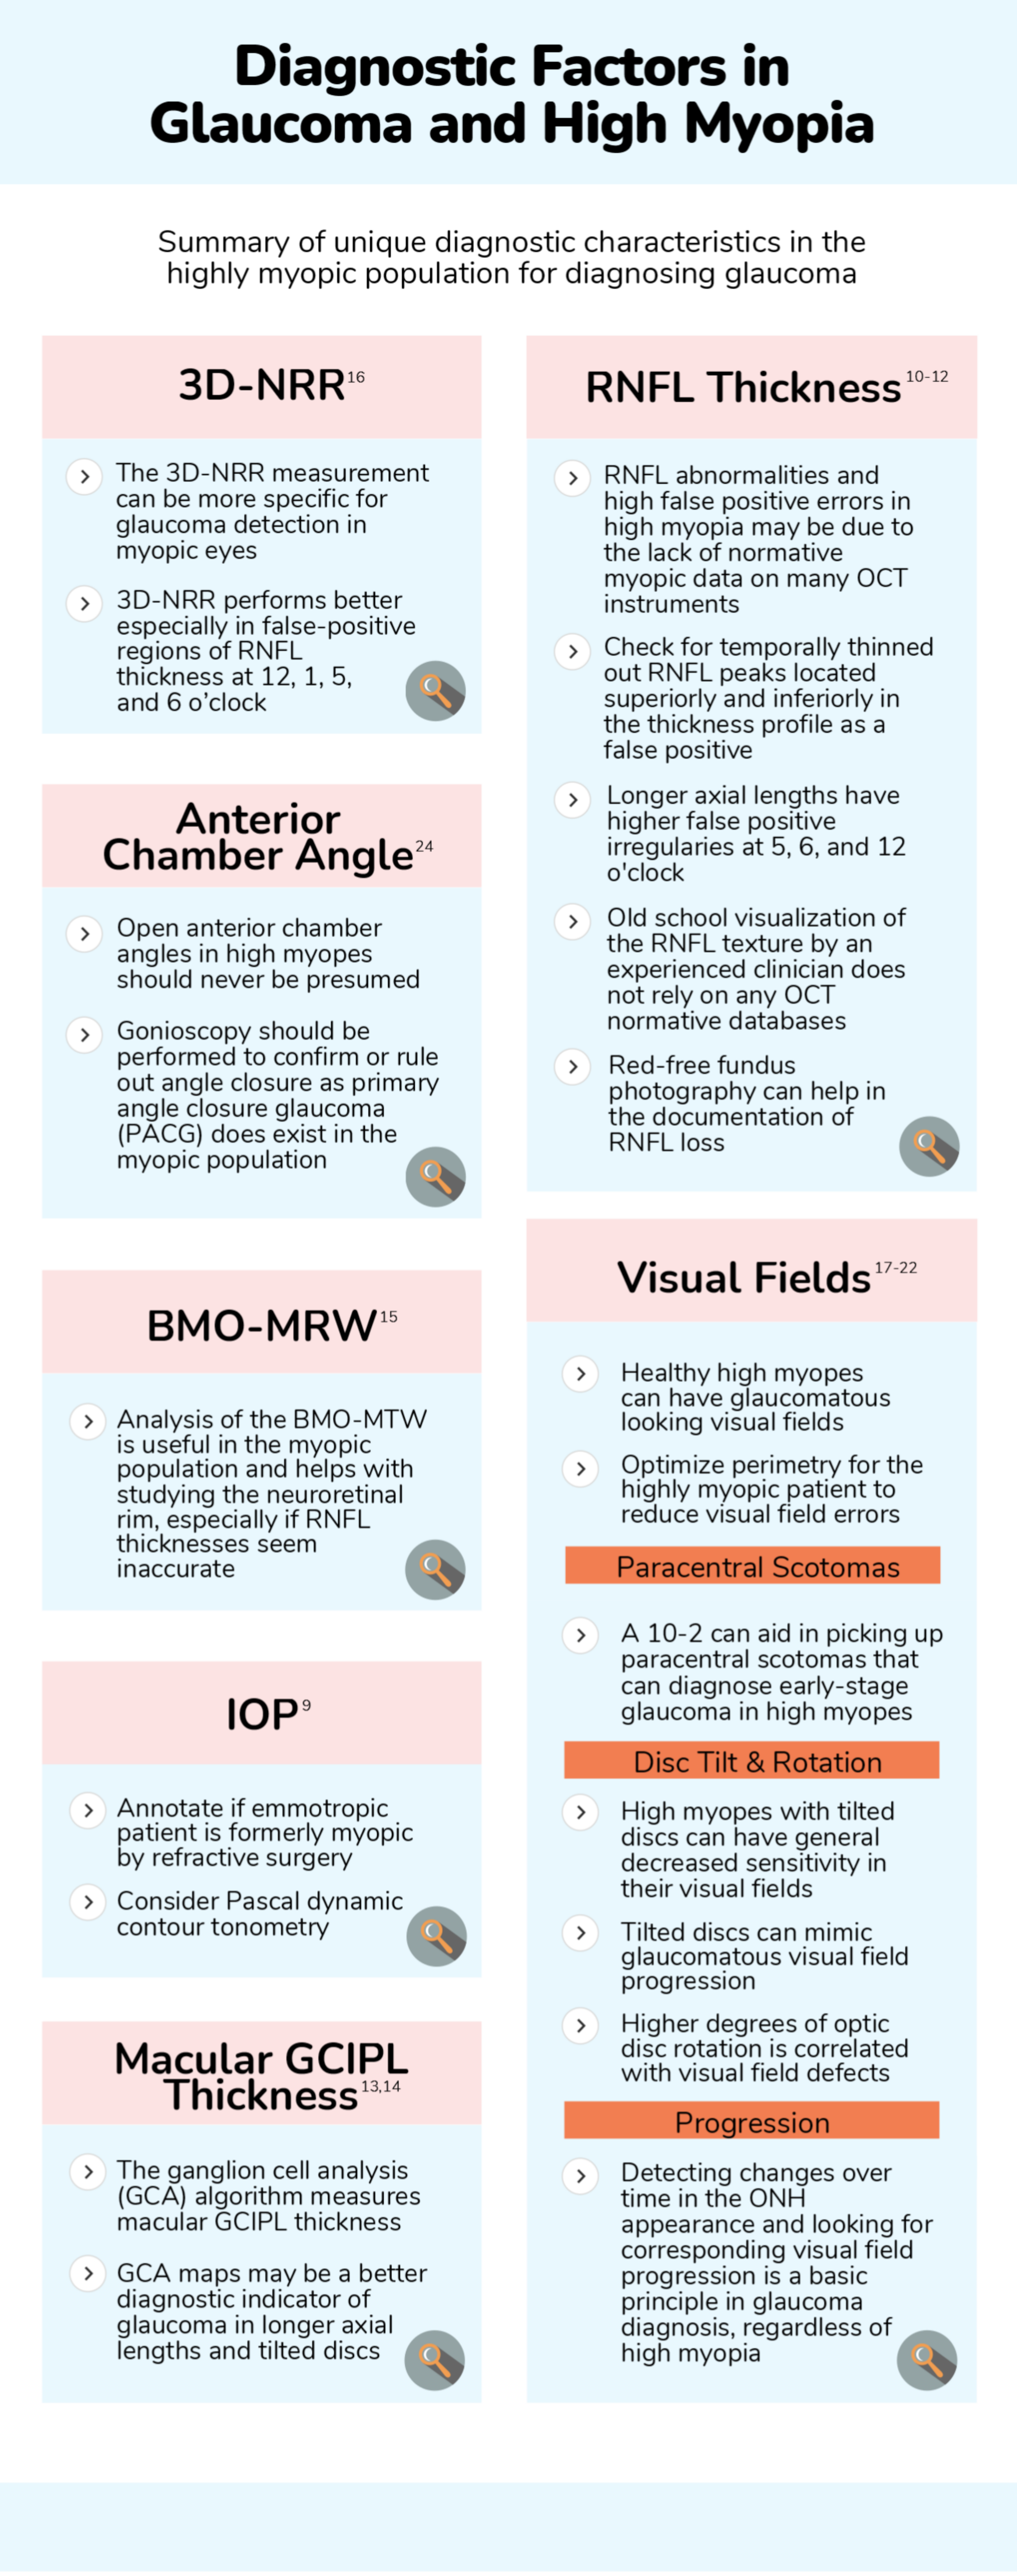 https://covalentcareers3.s3.amazonaws.com/media/original_images/high_myopia_and_glaucoma_infographic.png